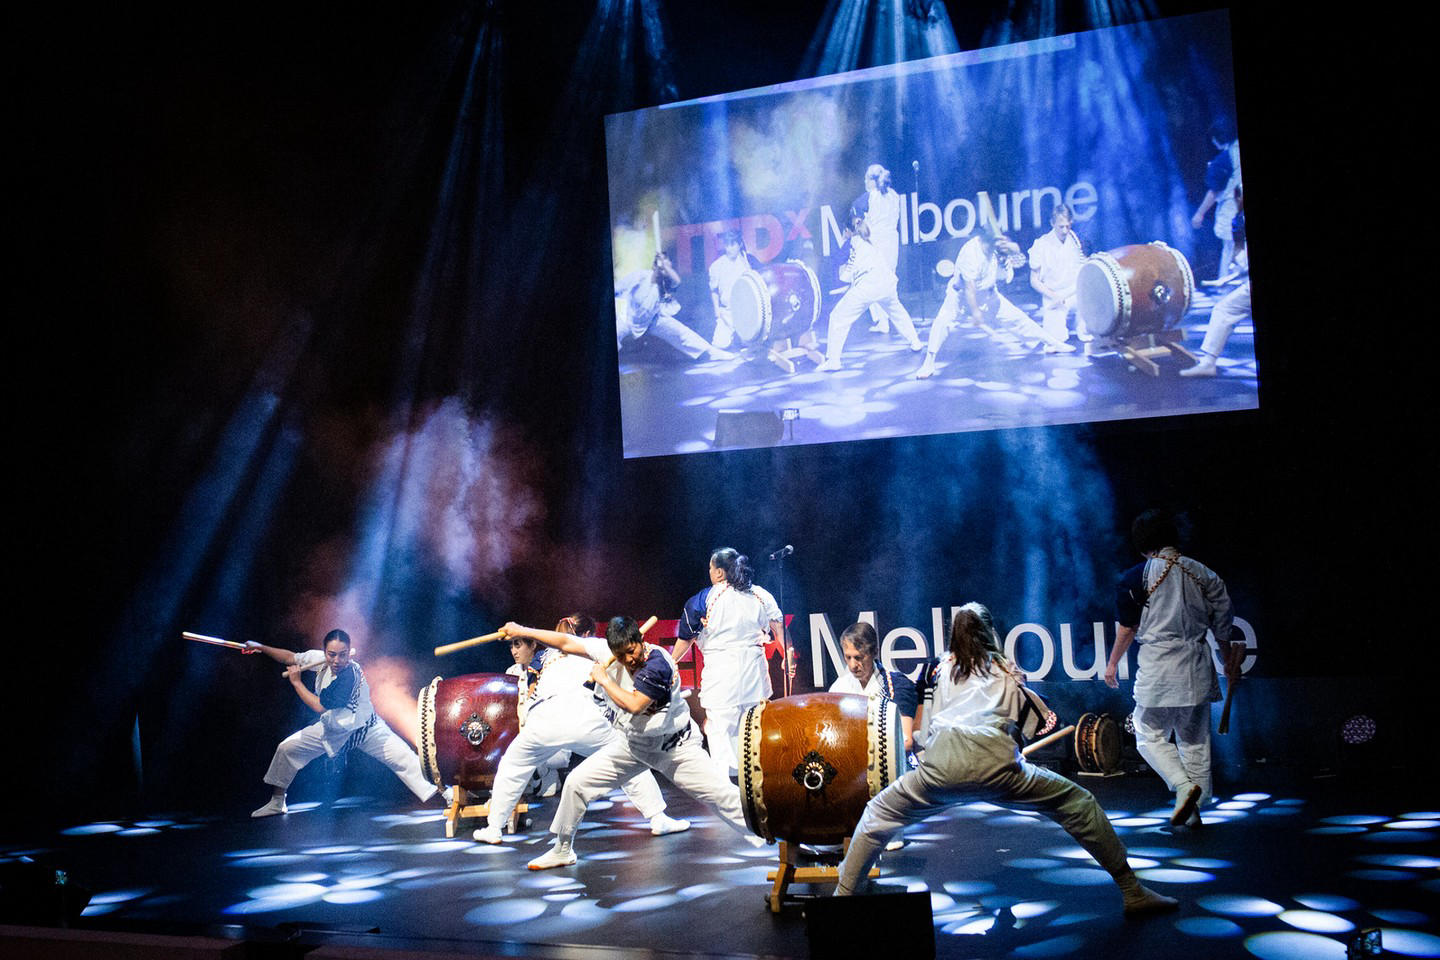 Long-time event #TEDxMelbourne in Australia creates some striking scenes at its event themed “Kintsu